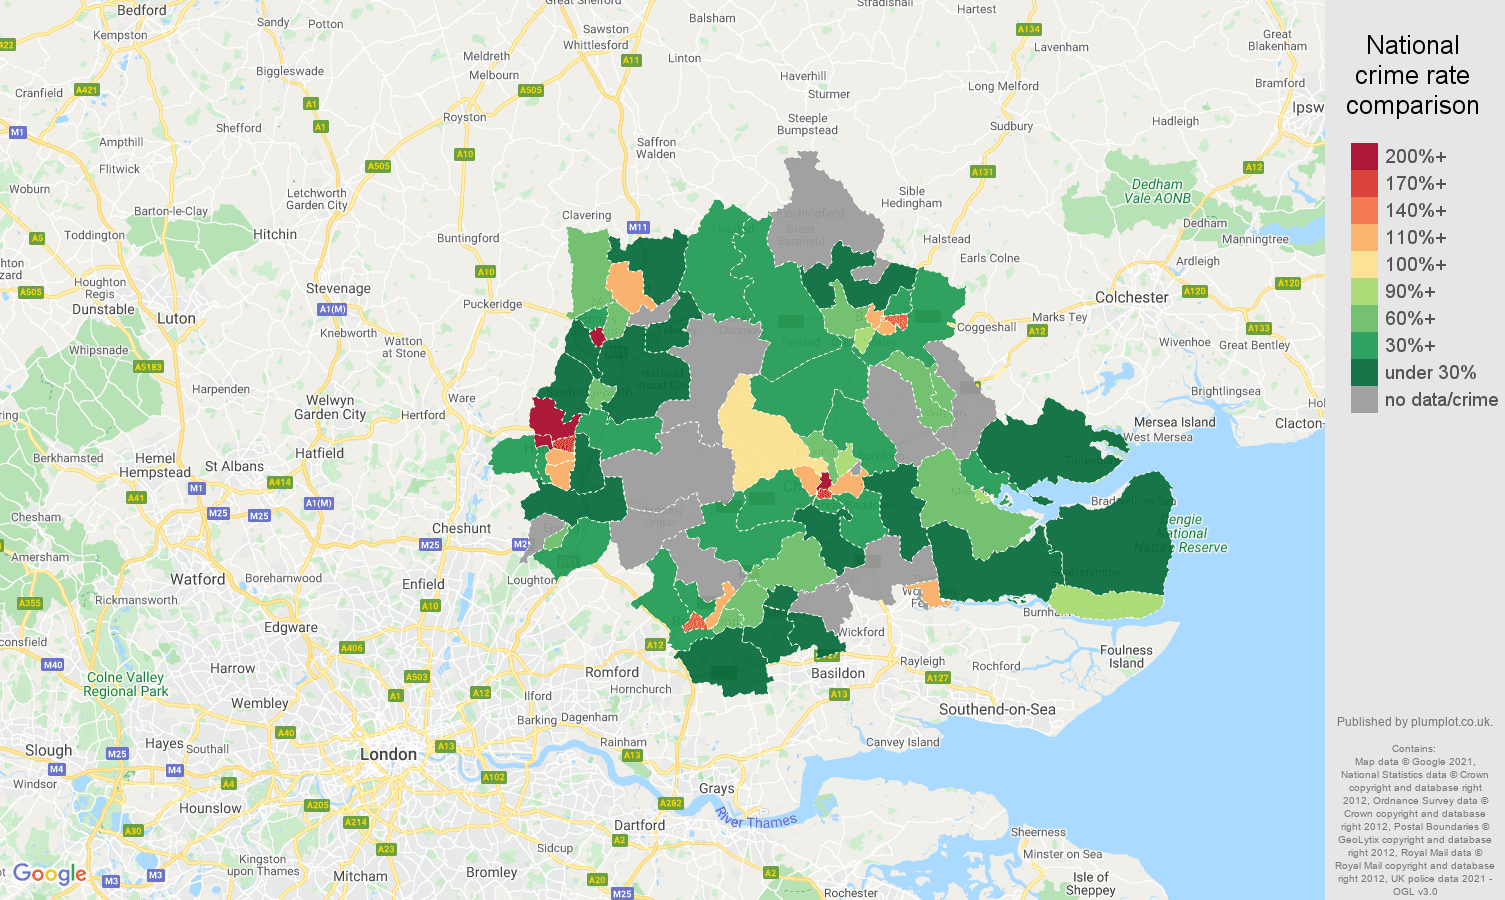 Chelmsford bicycle theft crime rate comparison map